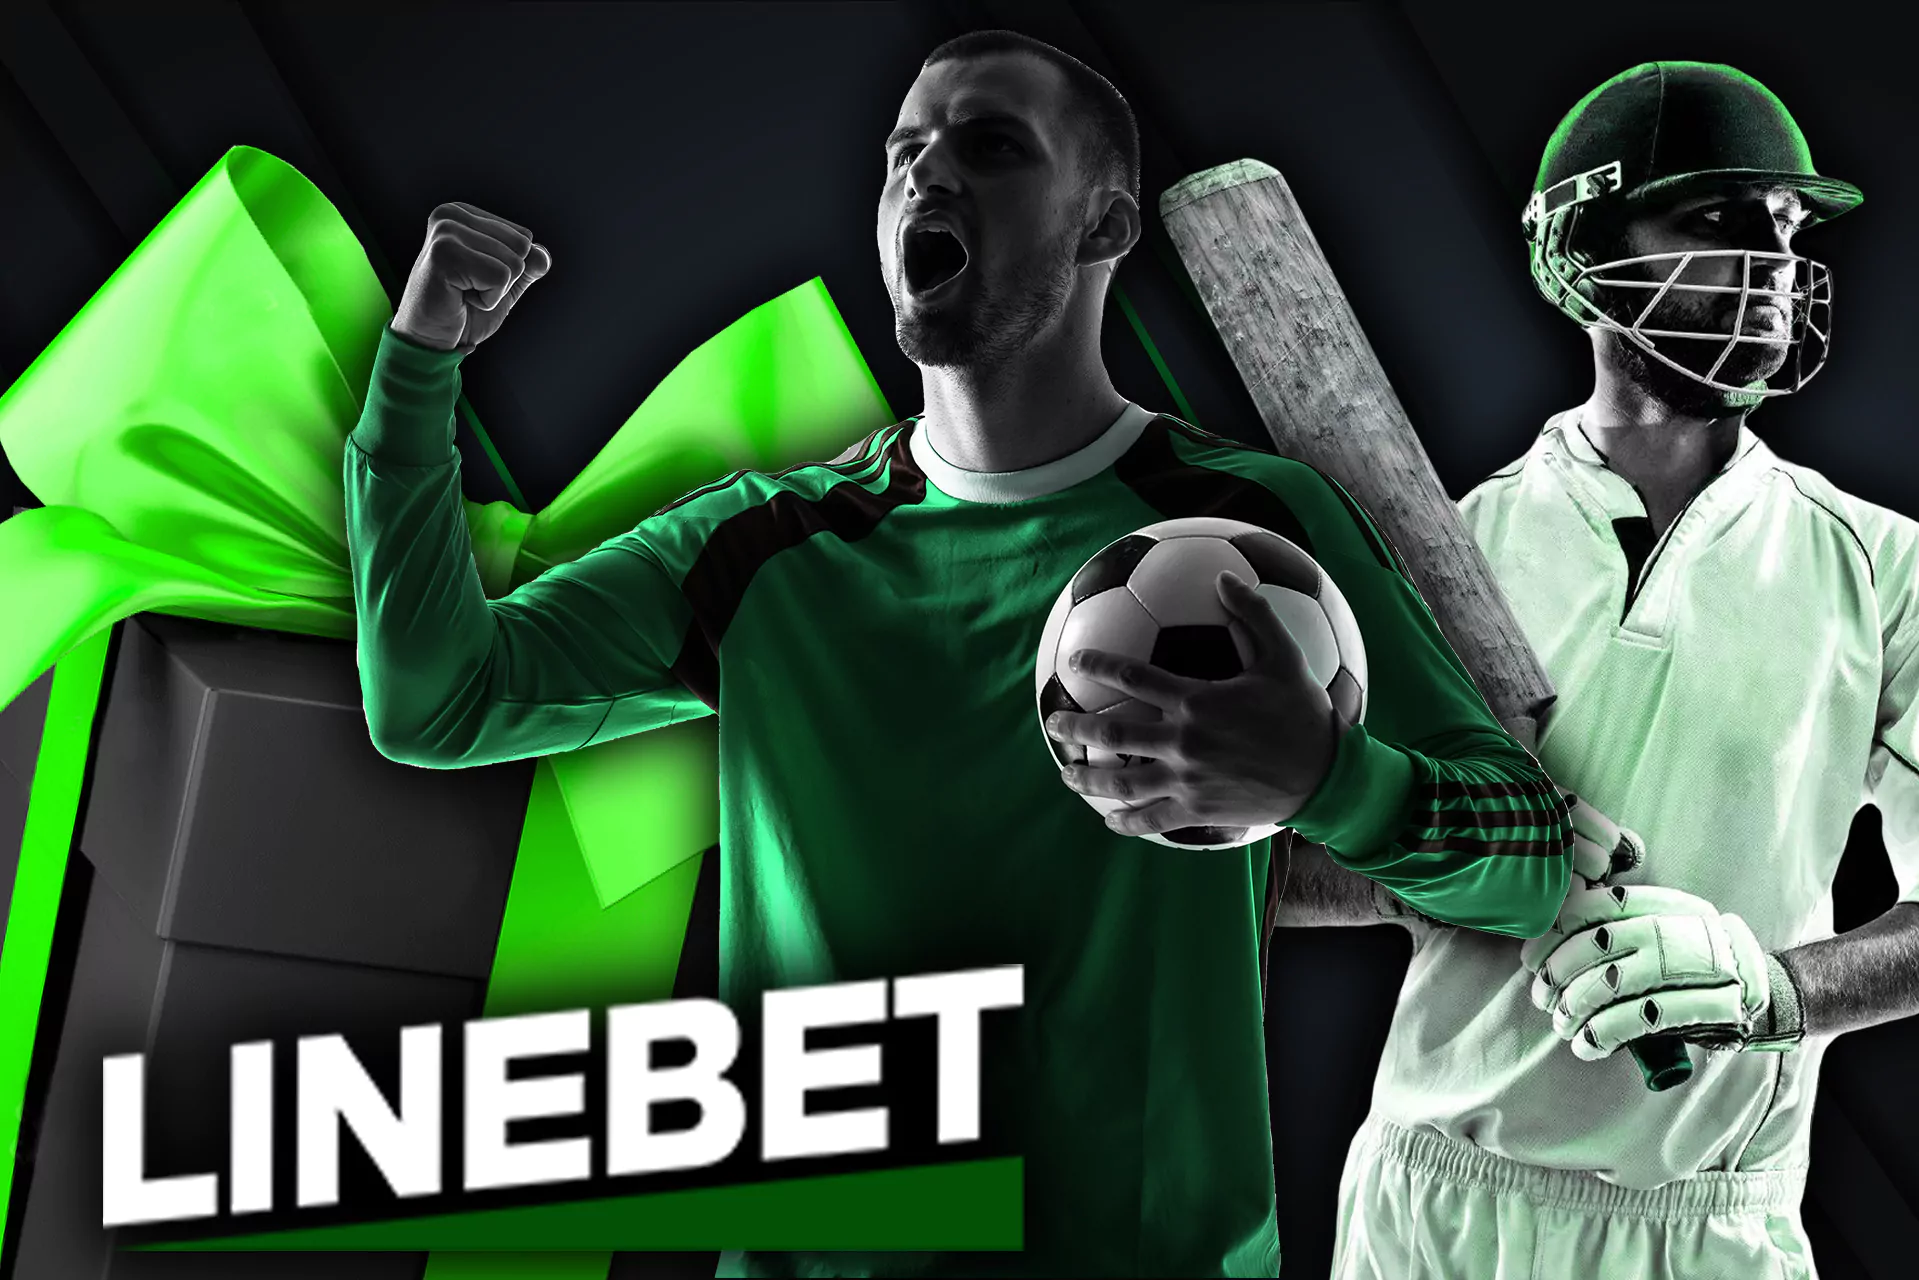 Get a Linebet bonus of up to 10,000 INR on sports betting.